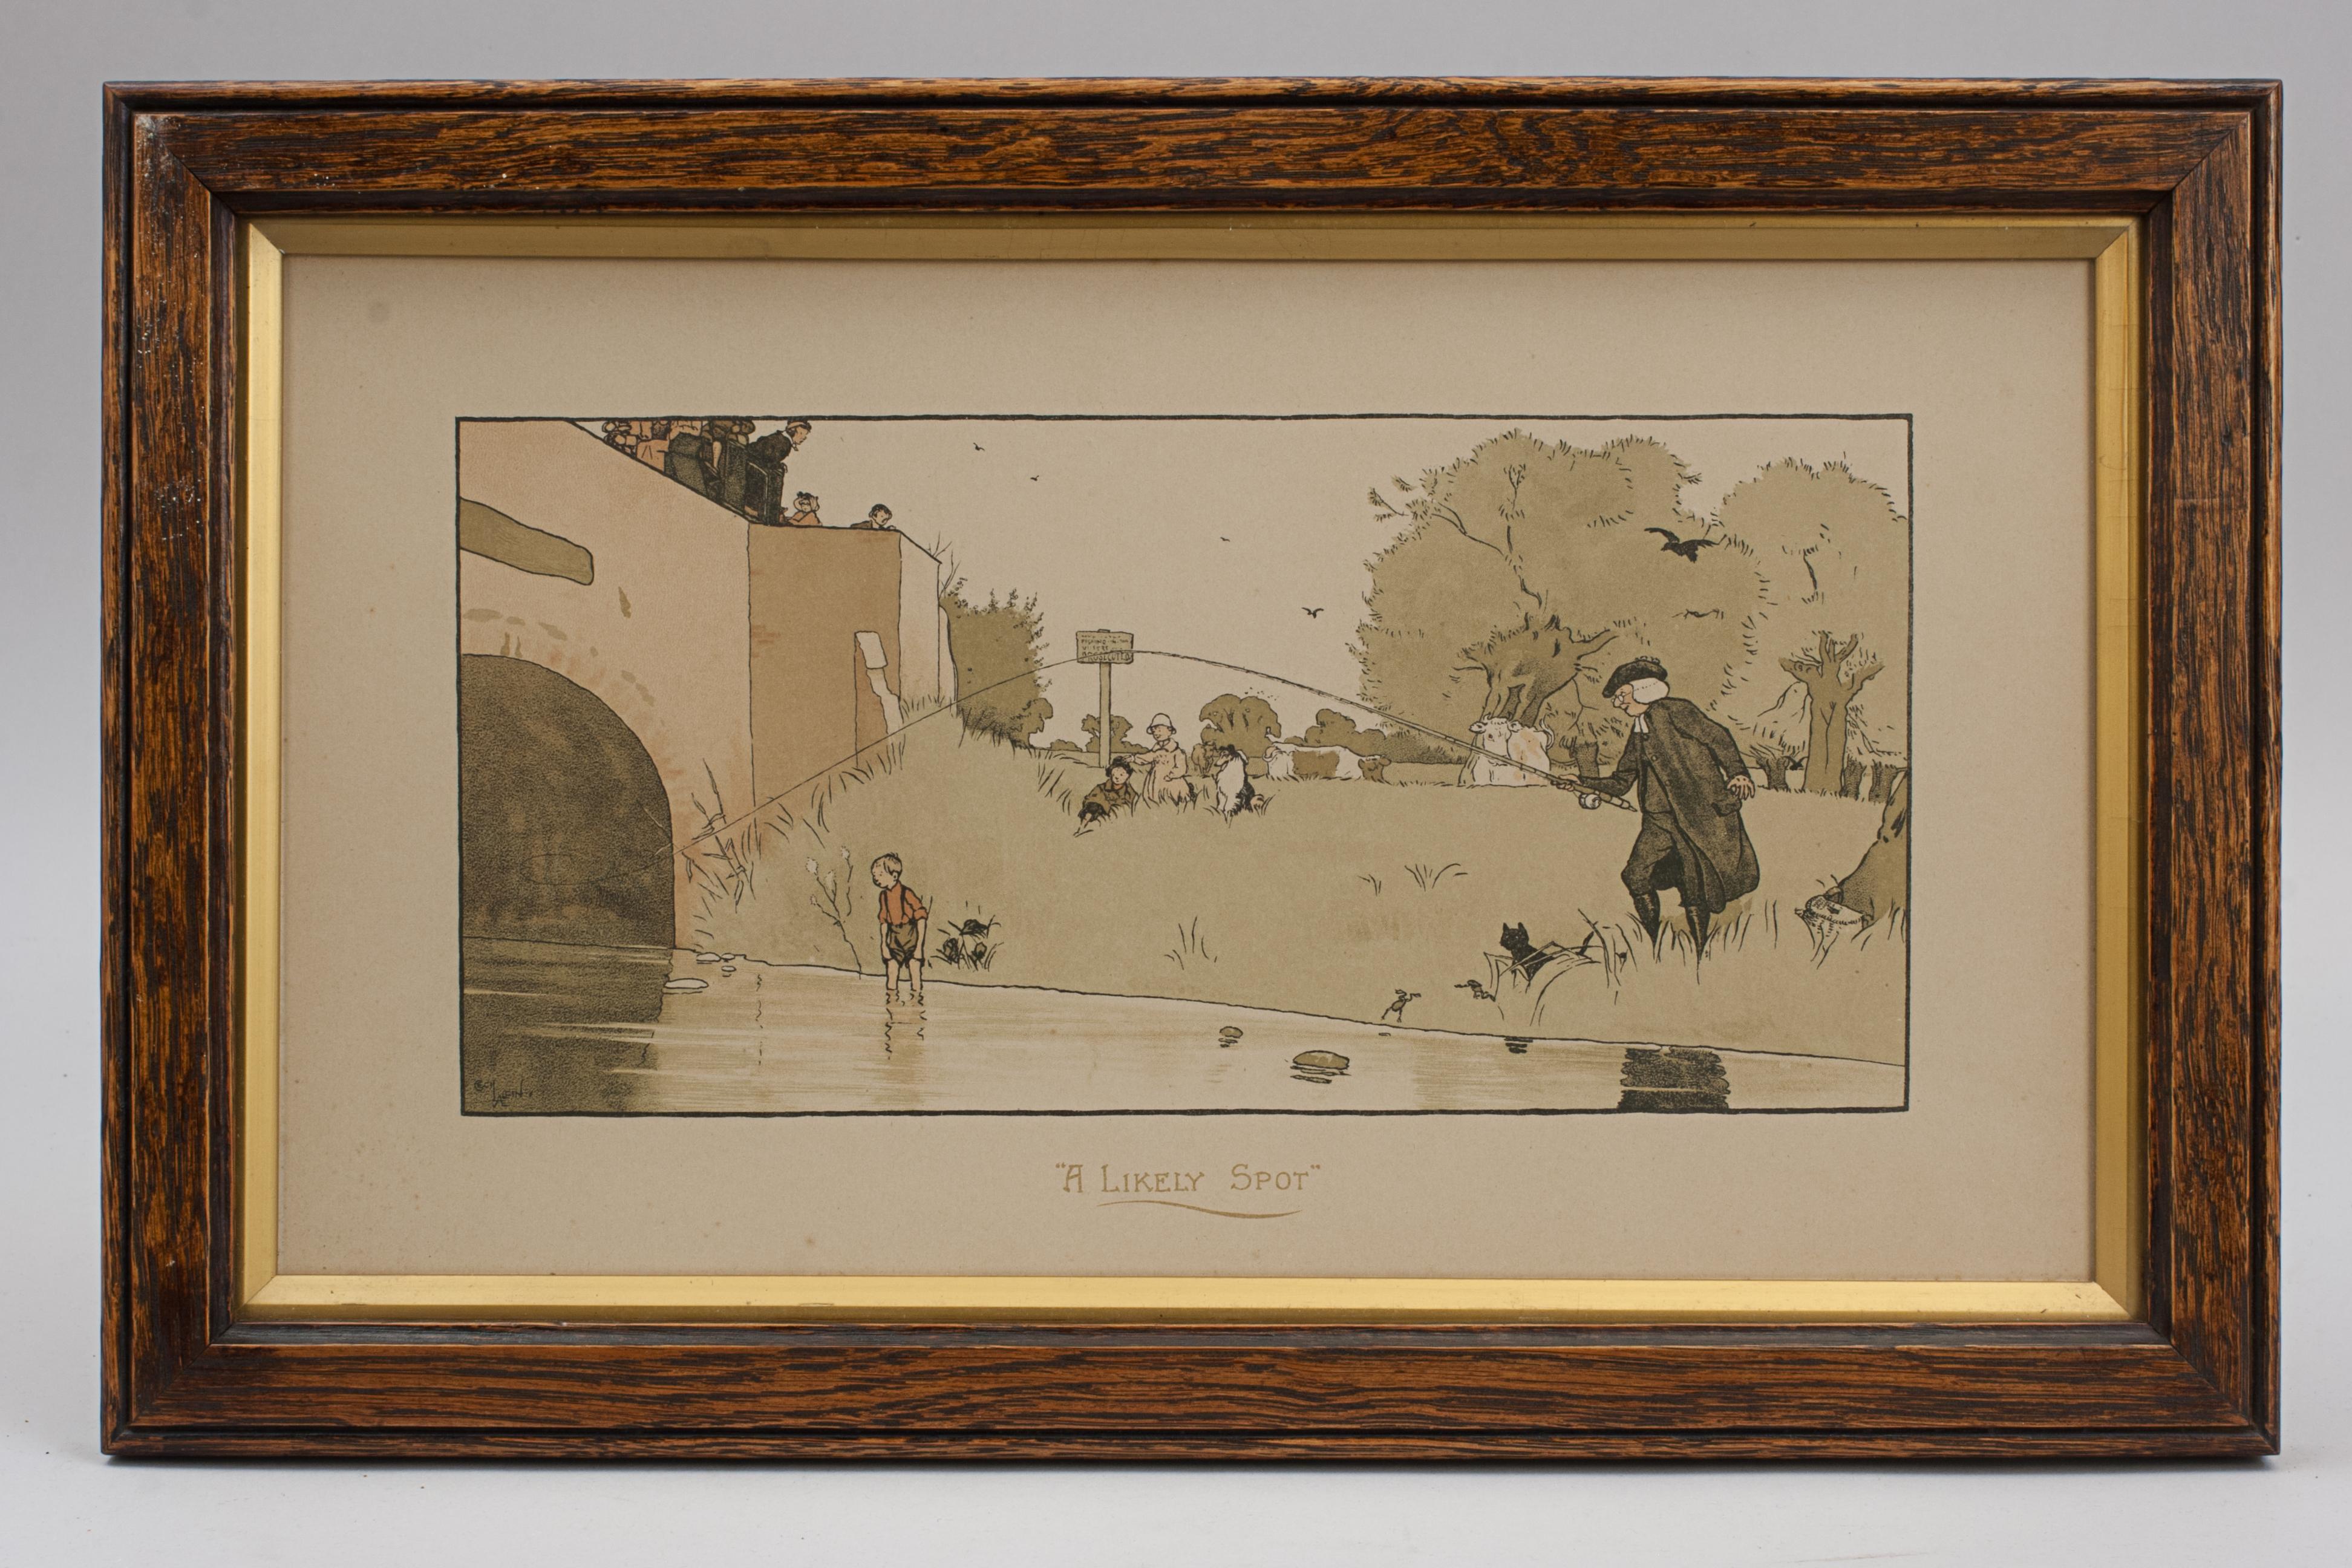 Sporting Art Cecil Aldin Fishing Print, a Likely Spot For Sale